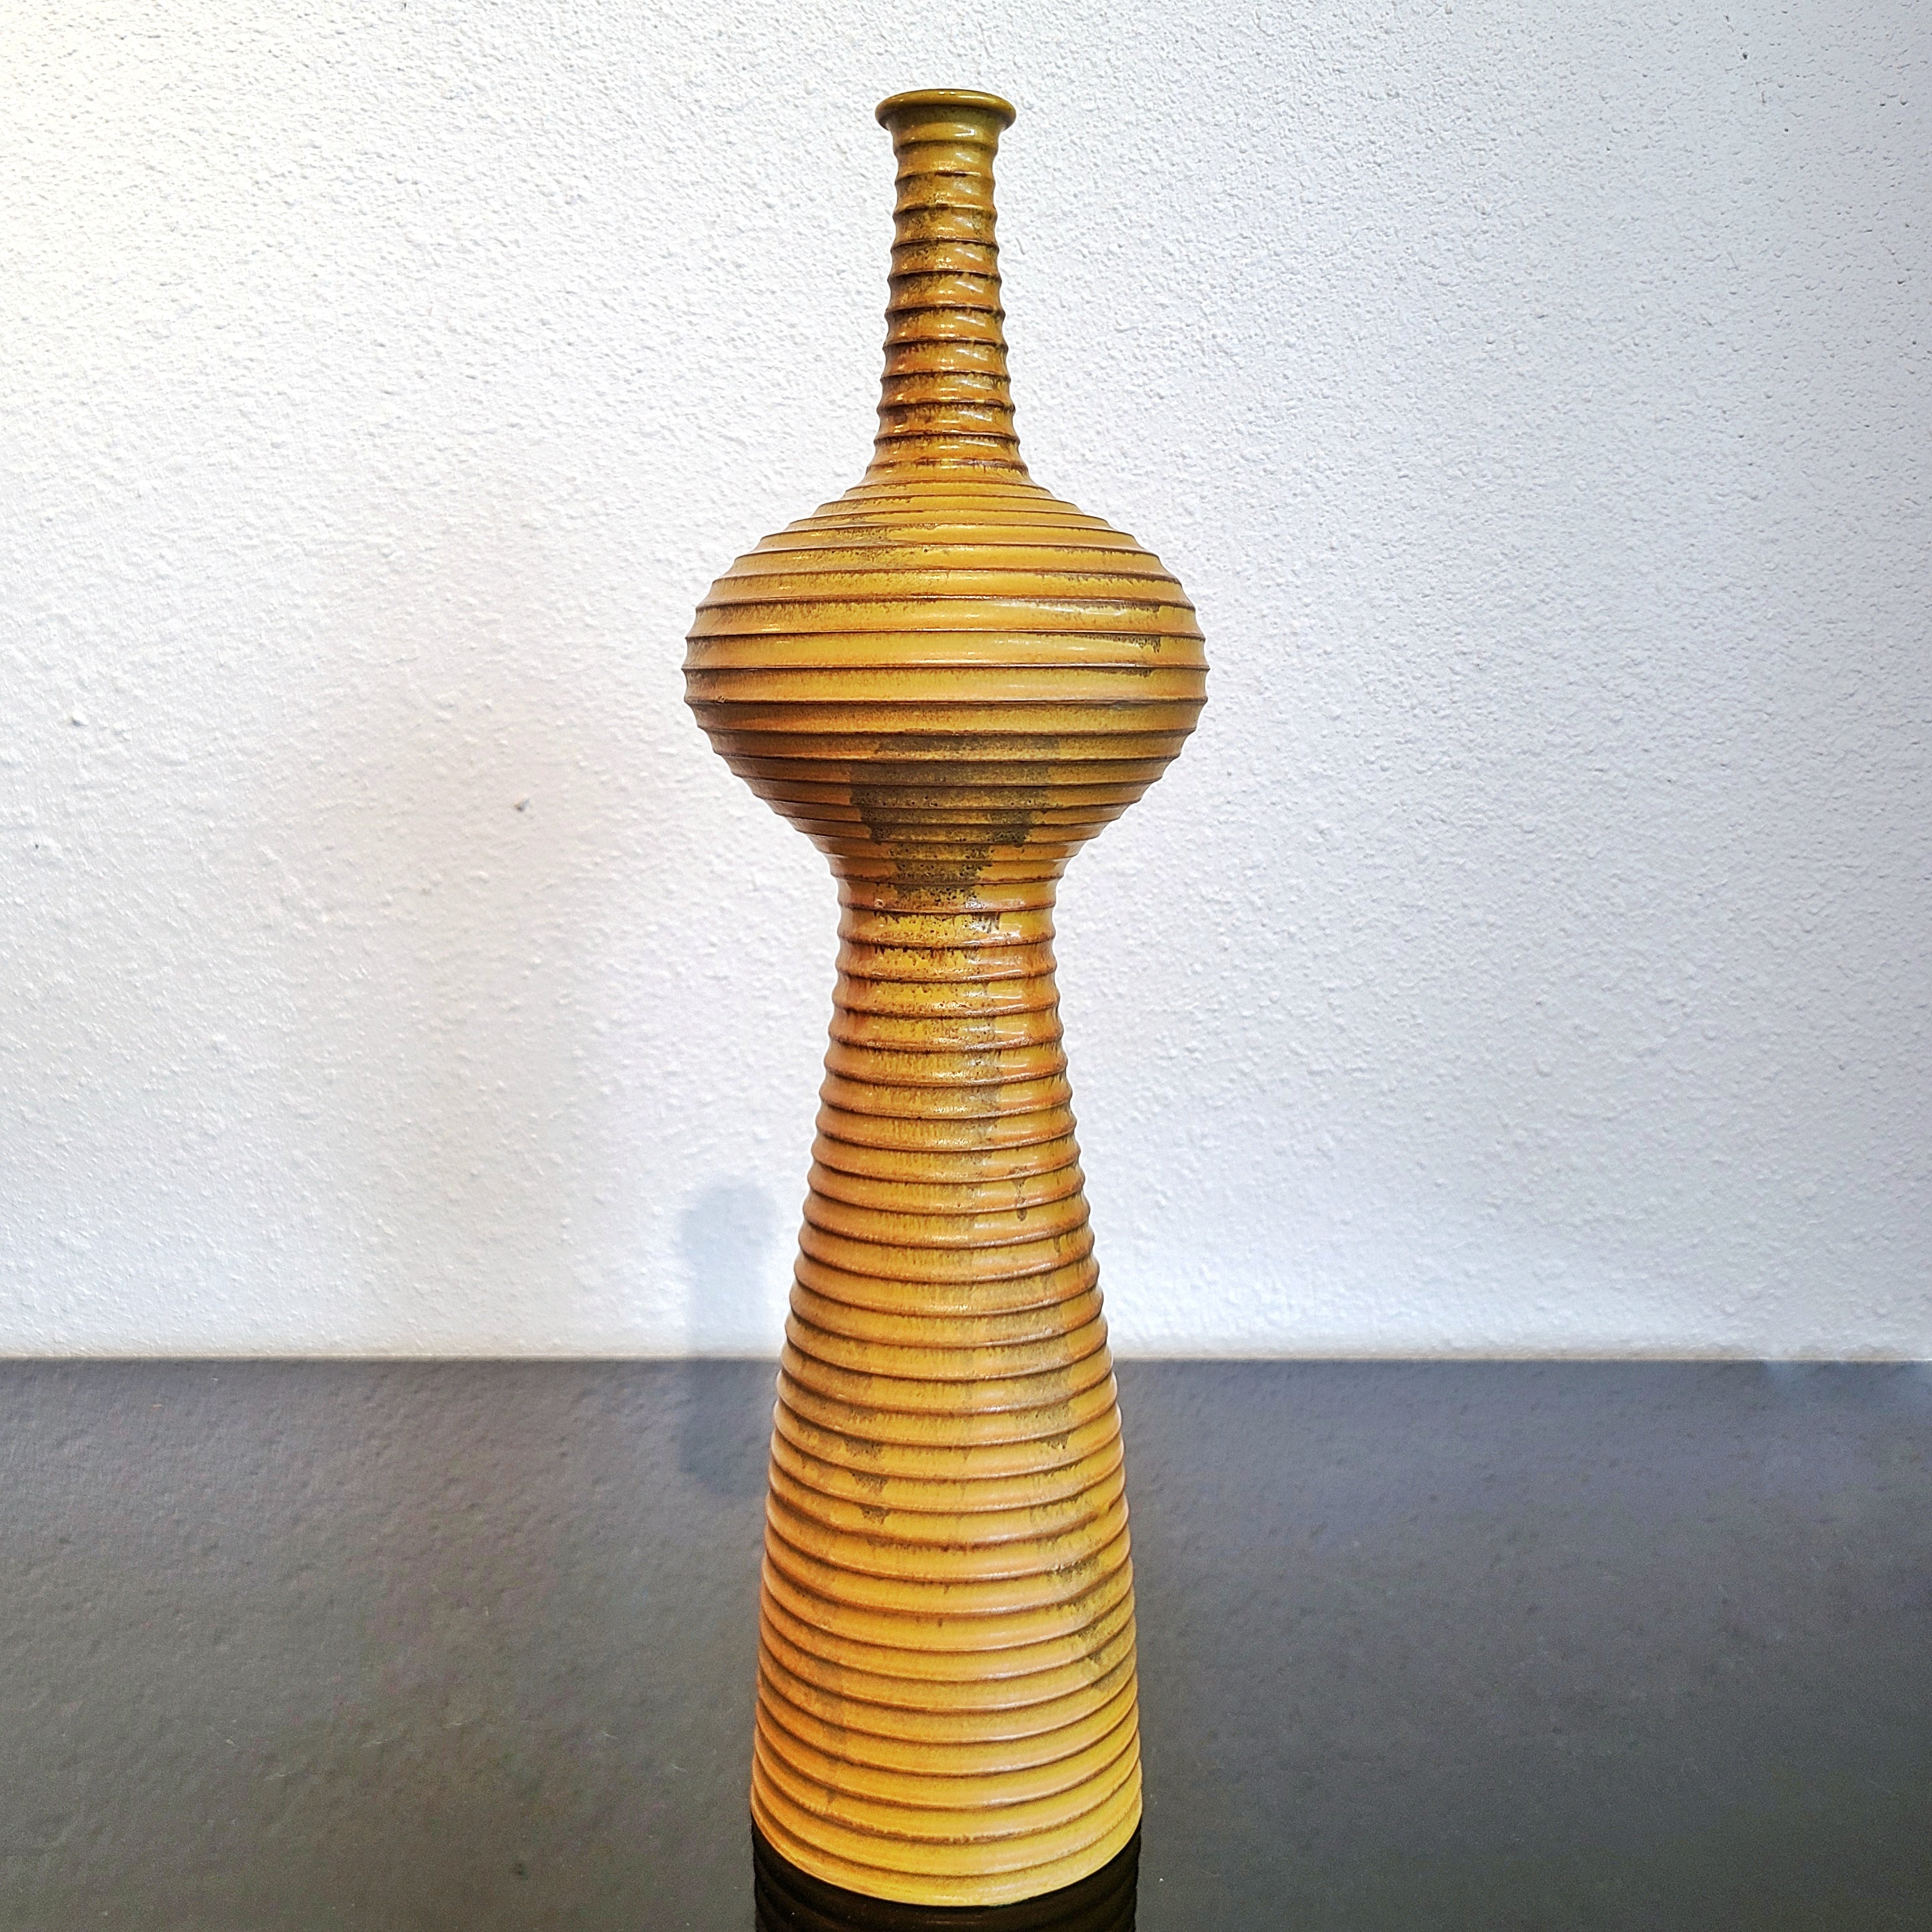 CONICAL VASE WITH BULB AND HORIZONTAL RIDGES BY ALVINO BAGNI